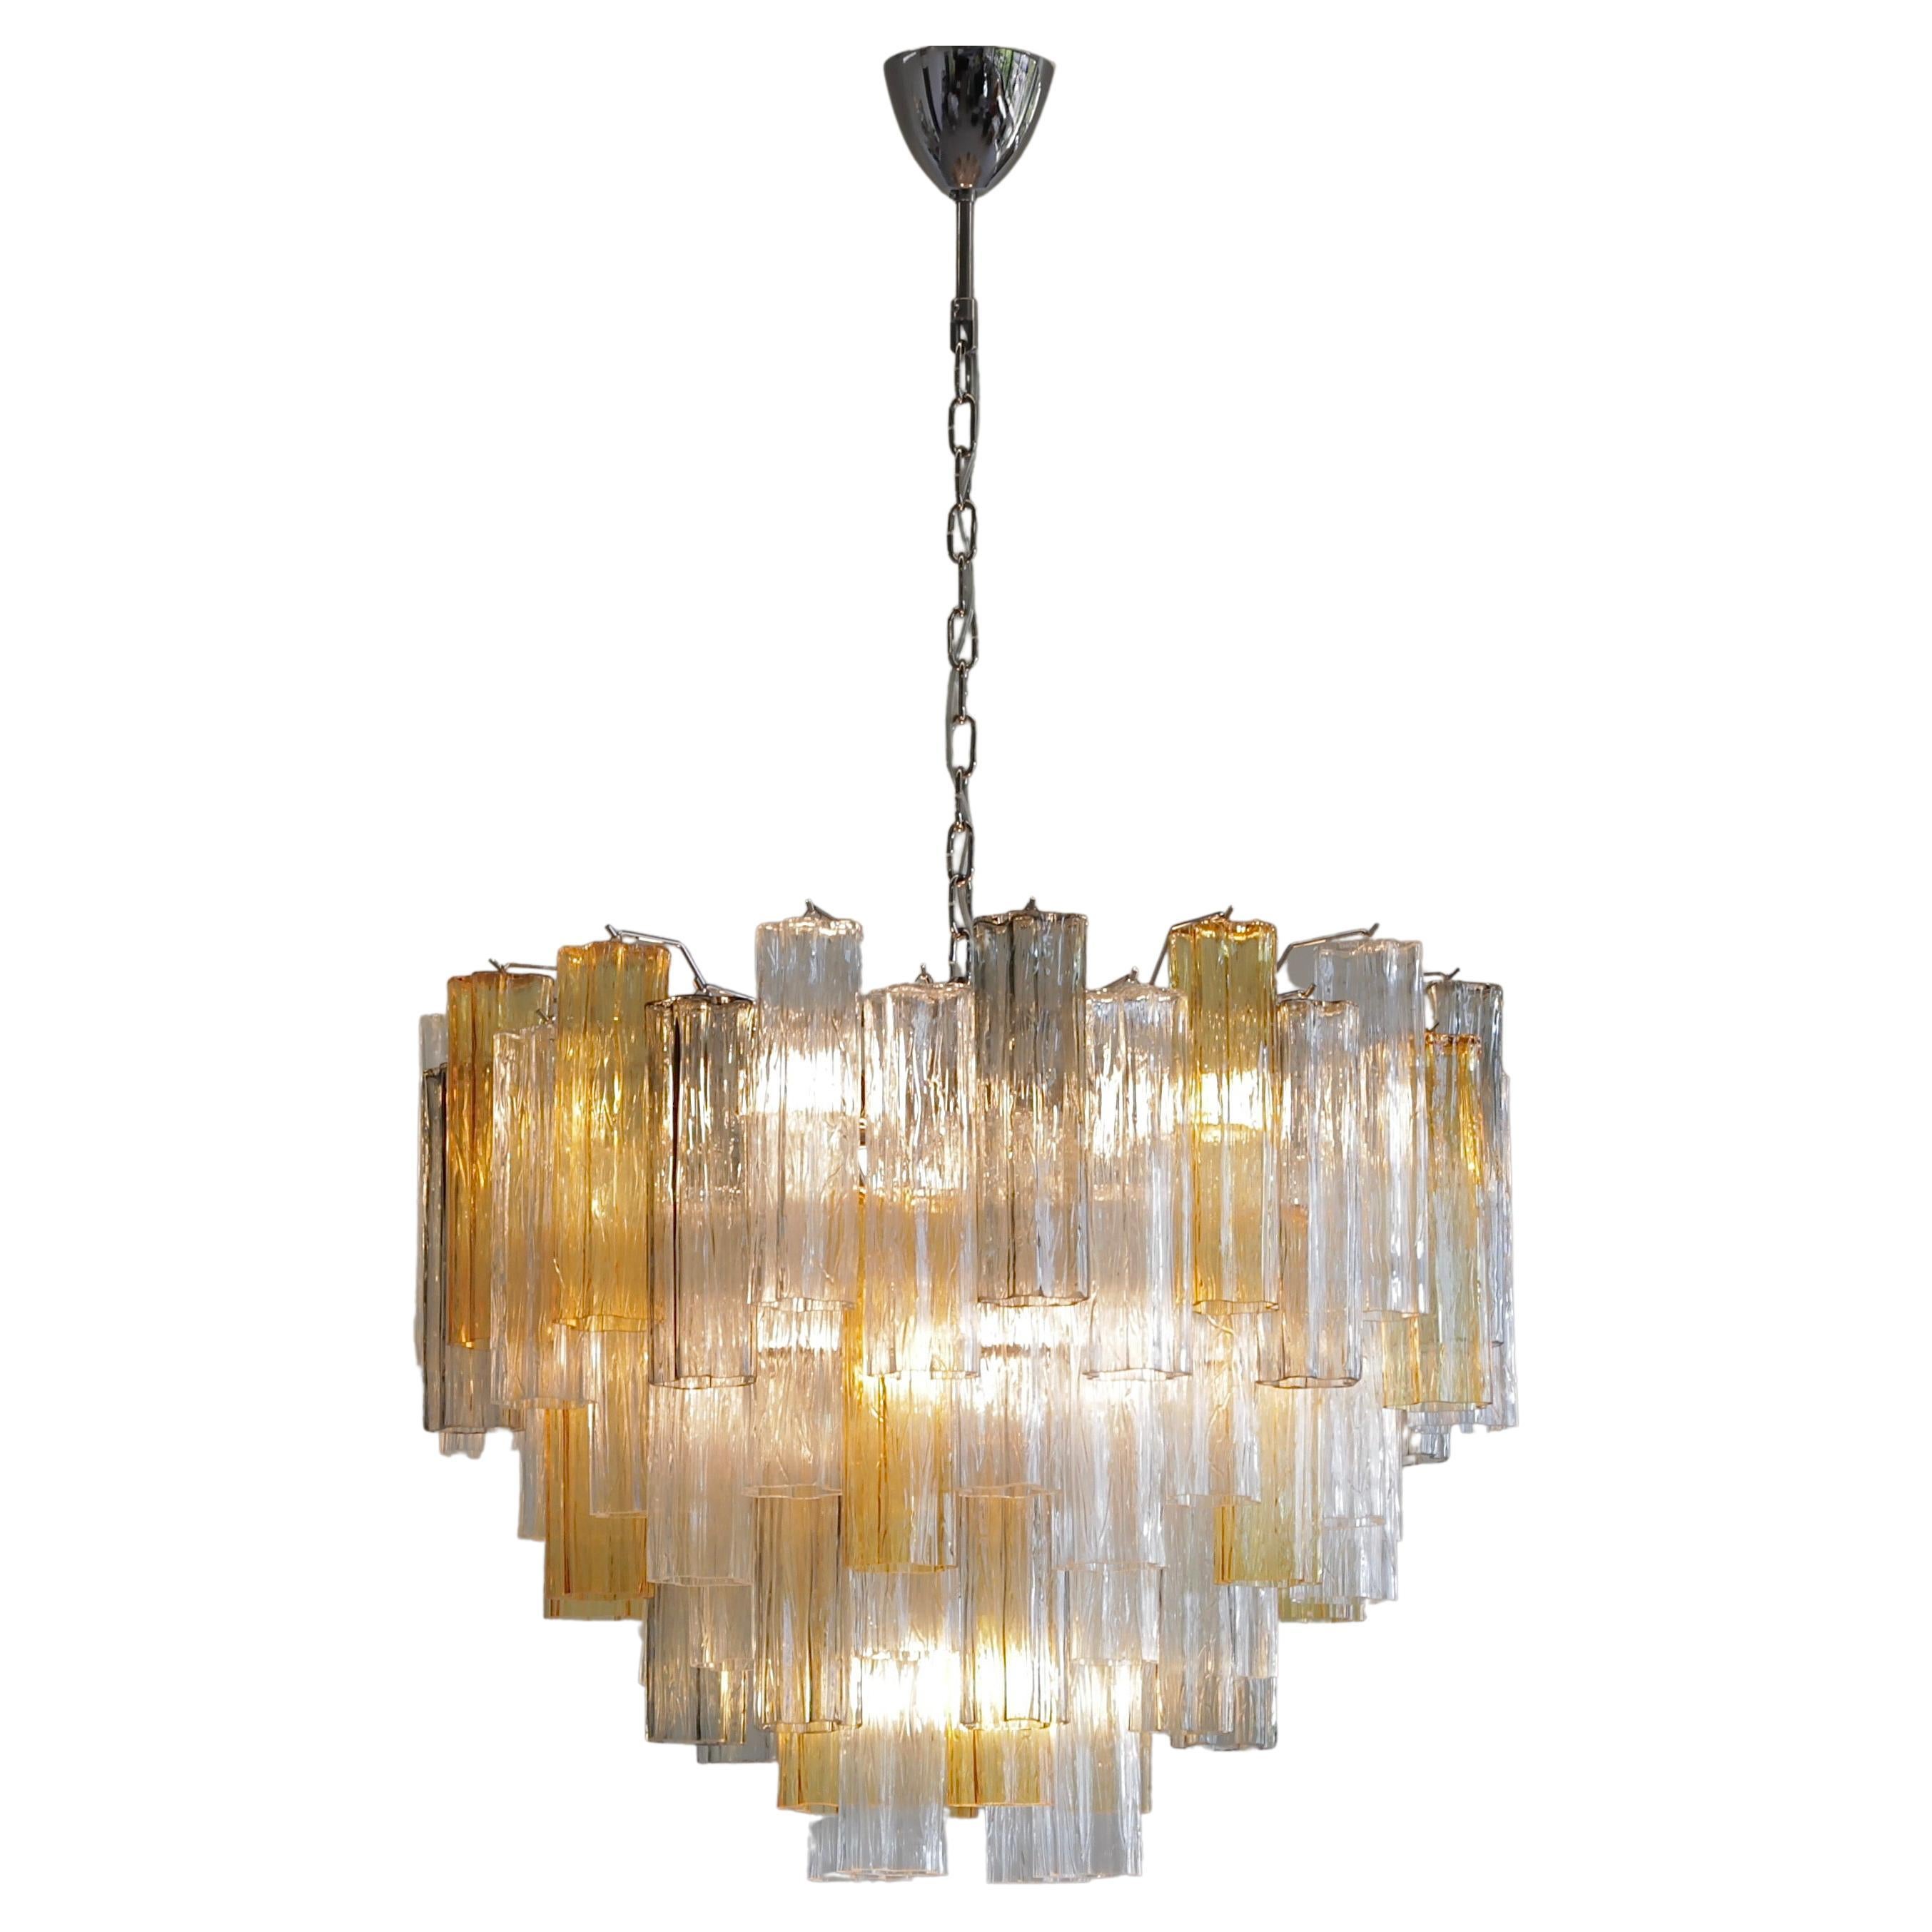 Tronchi Murano Glass Chandelier 'Amber, Clear, Brown', Italy